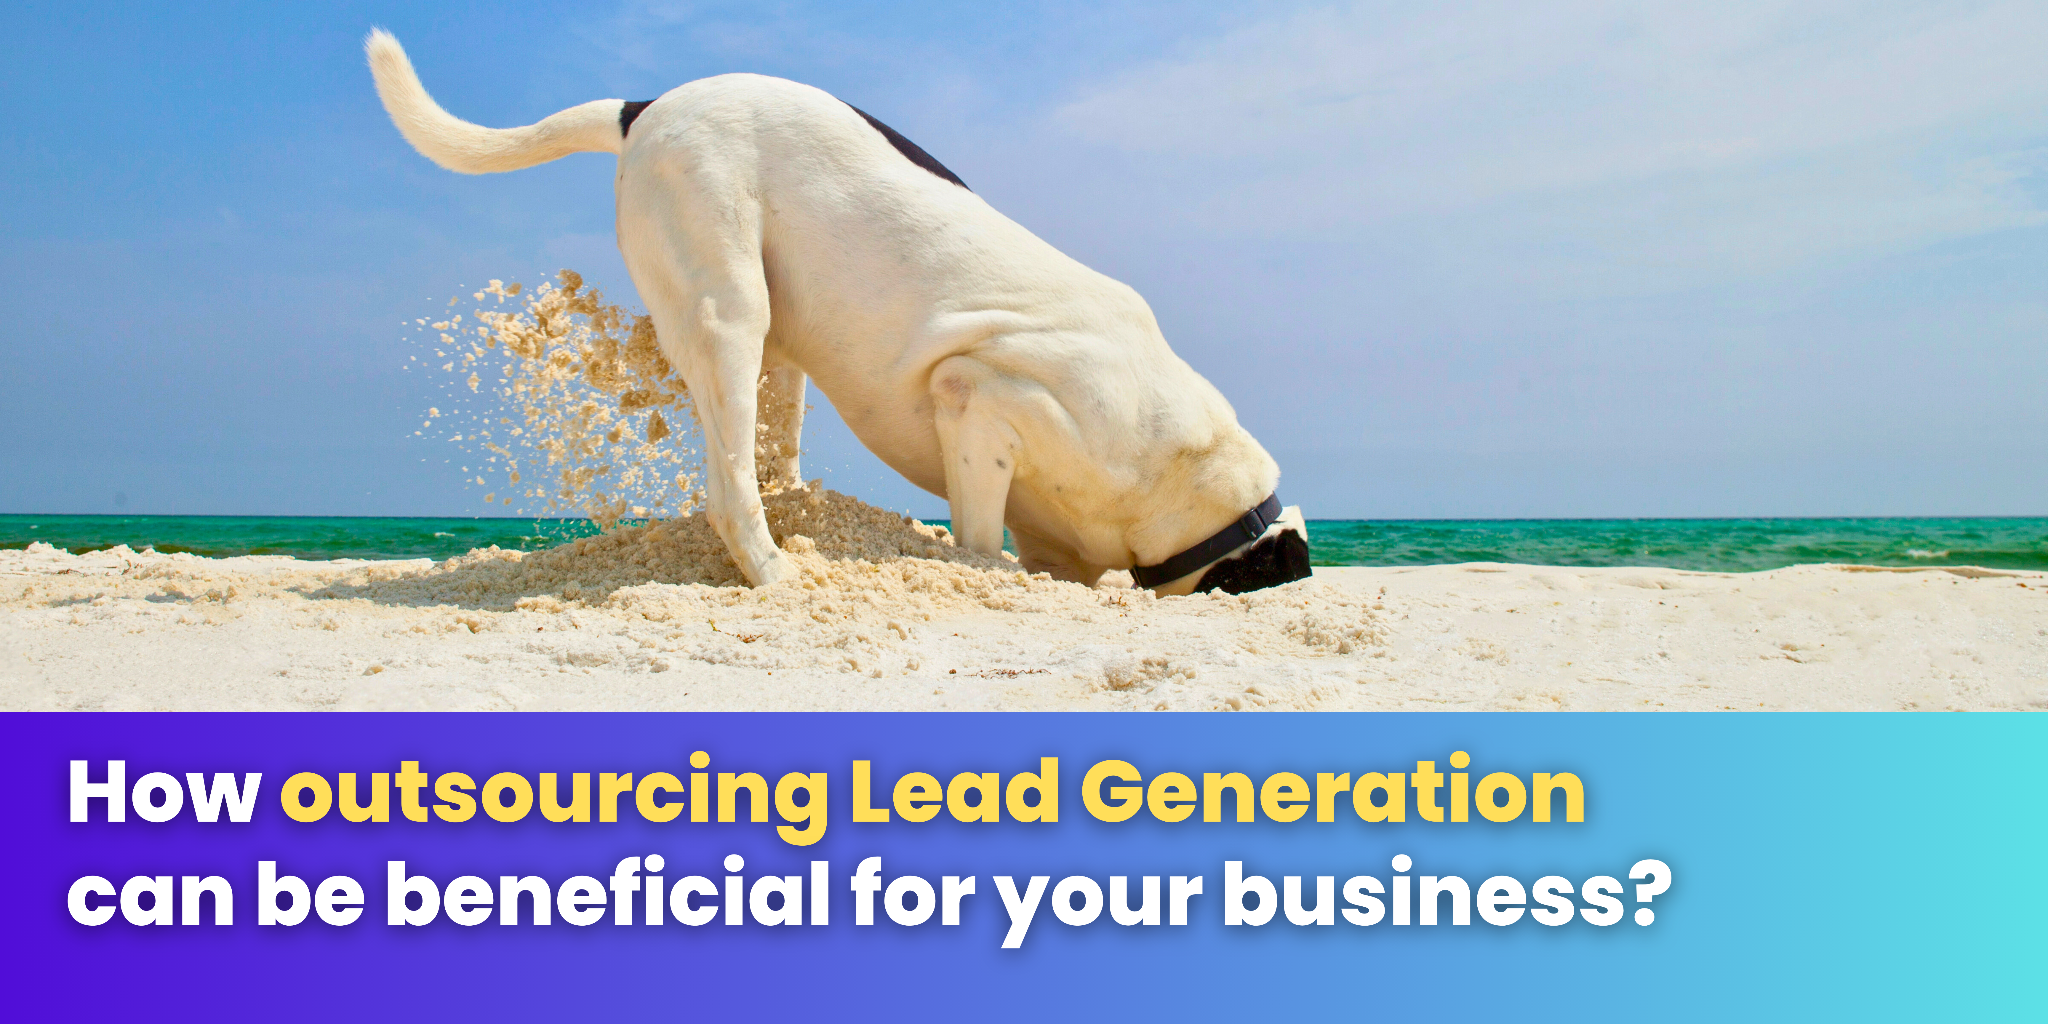 How outsourcing Lead Generation can be beneficial for your business?